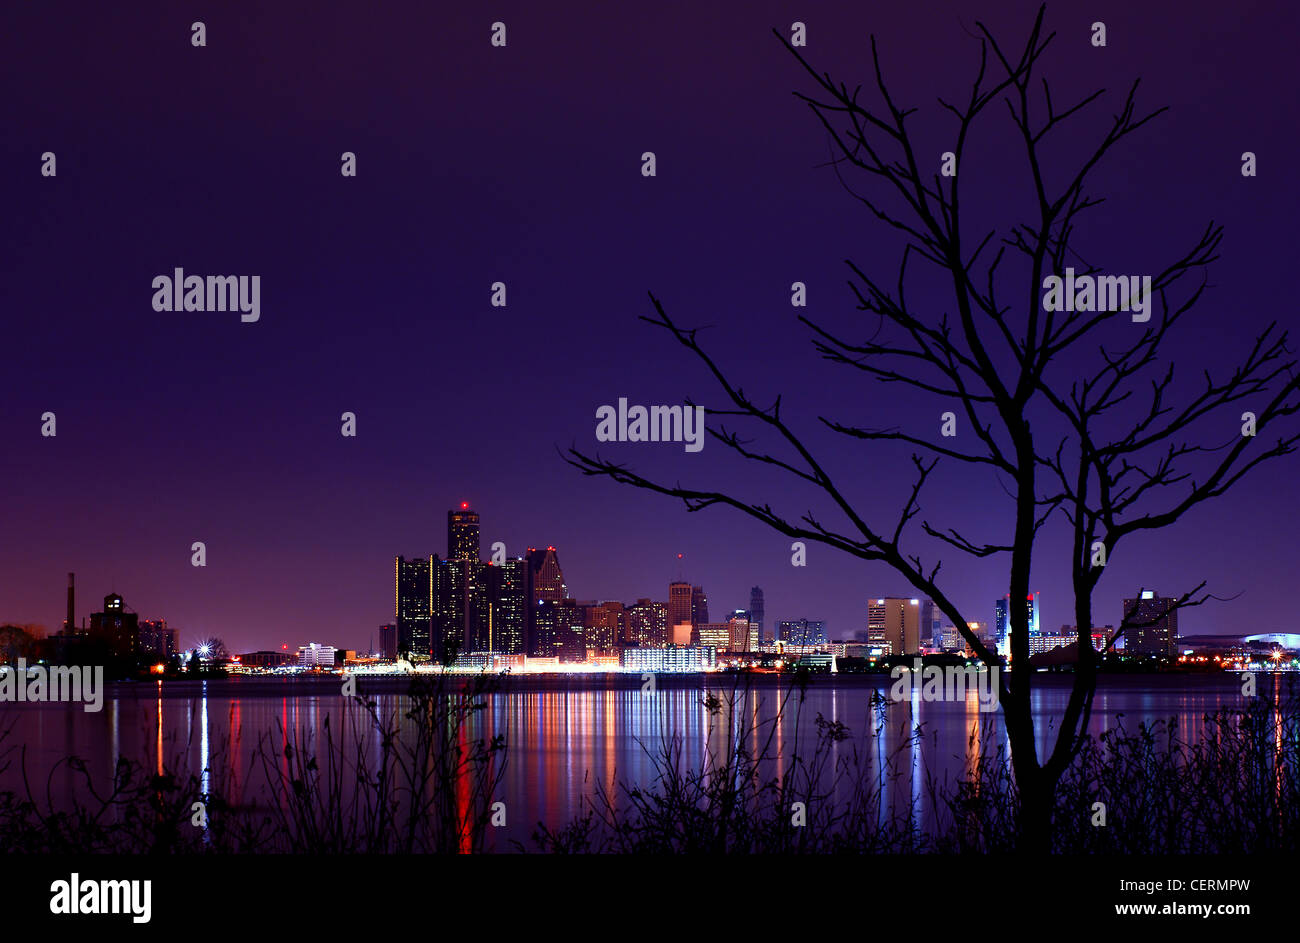 The Detroit Skyline at night from Windsor, Ontario Stock Photo